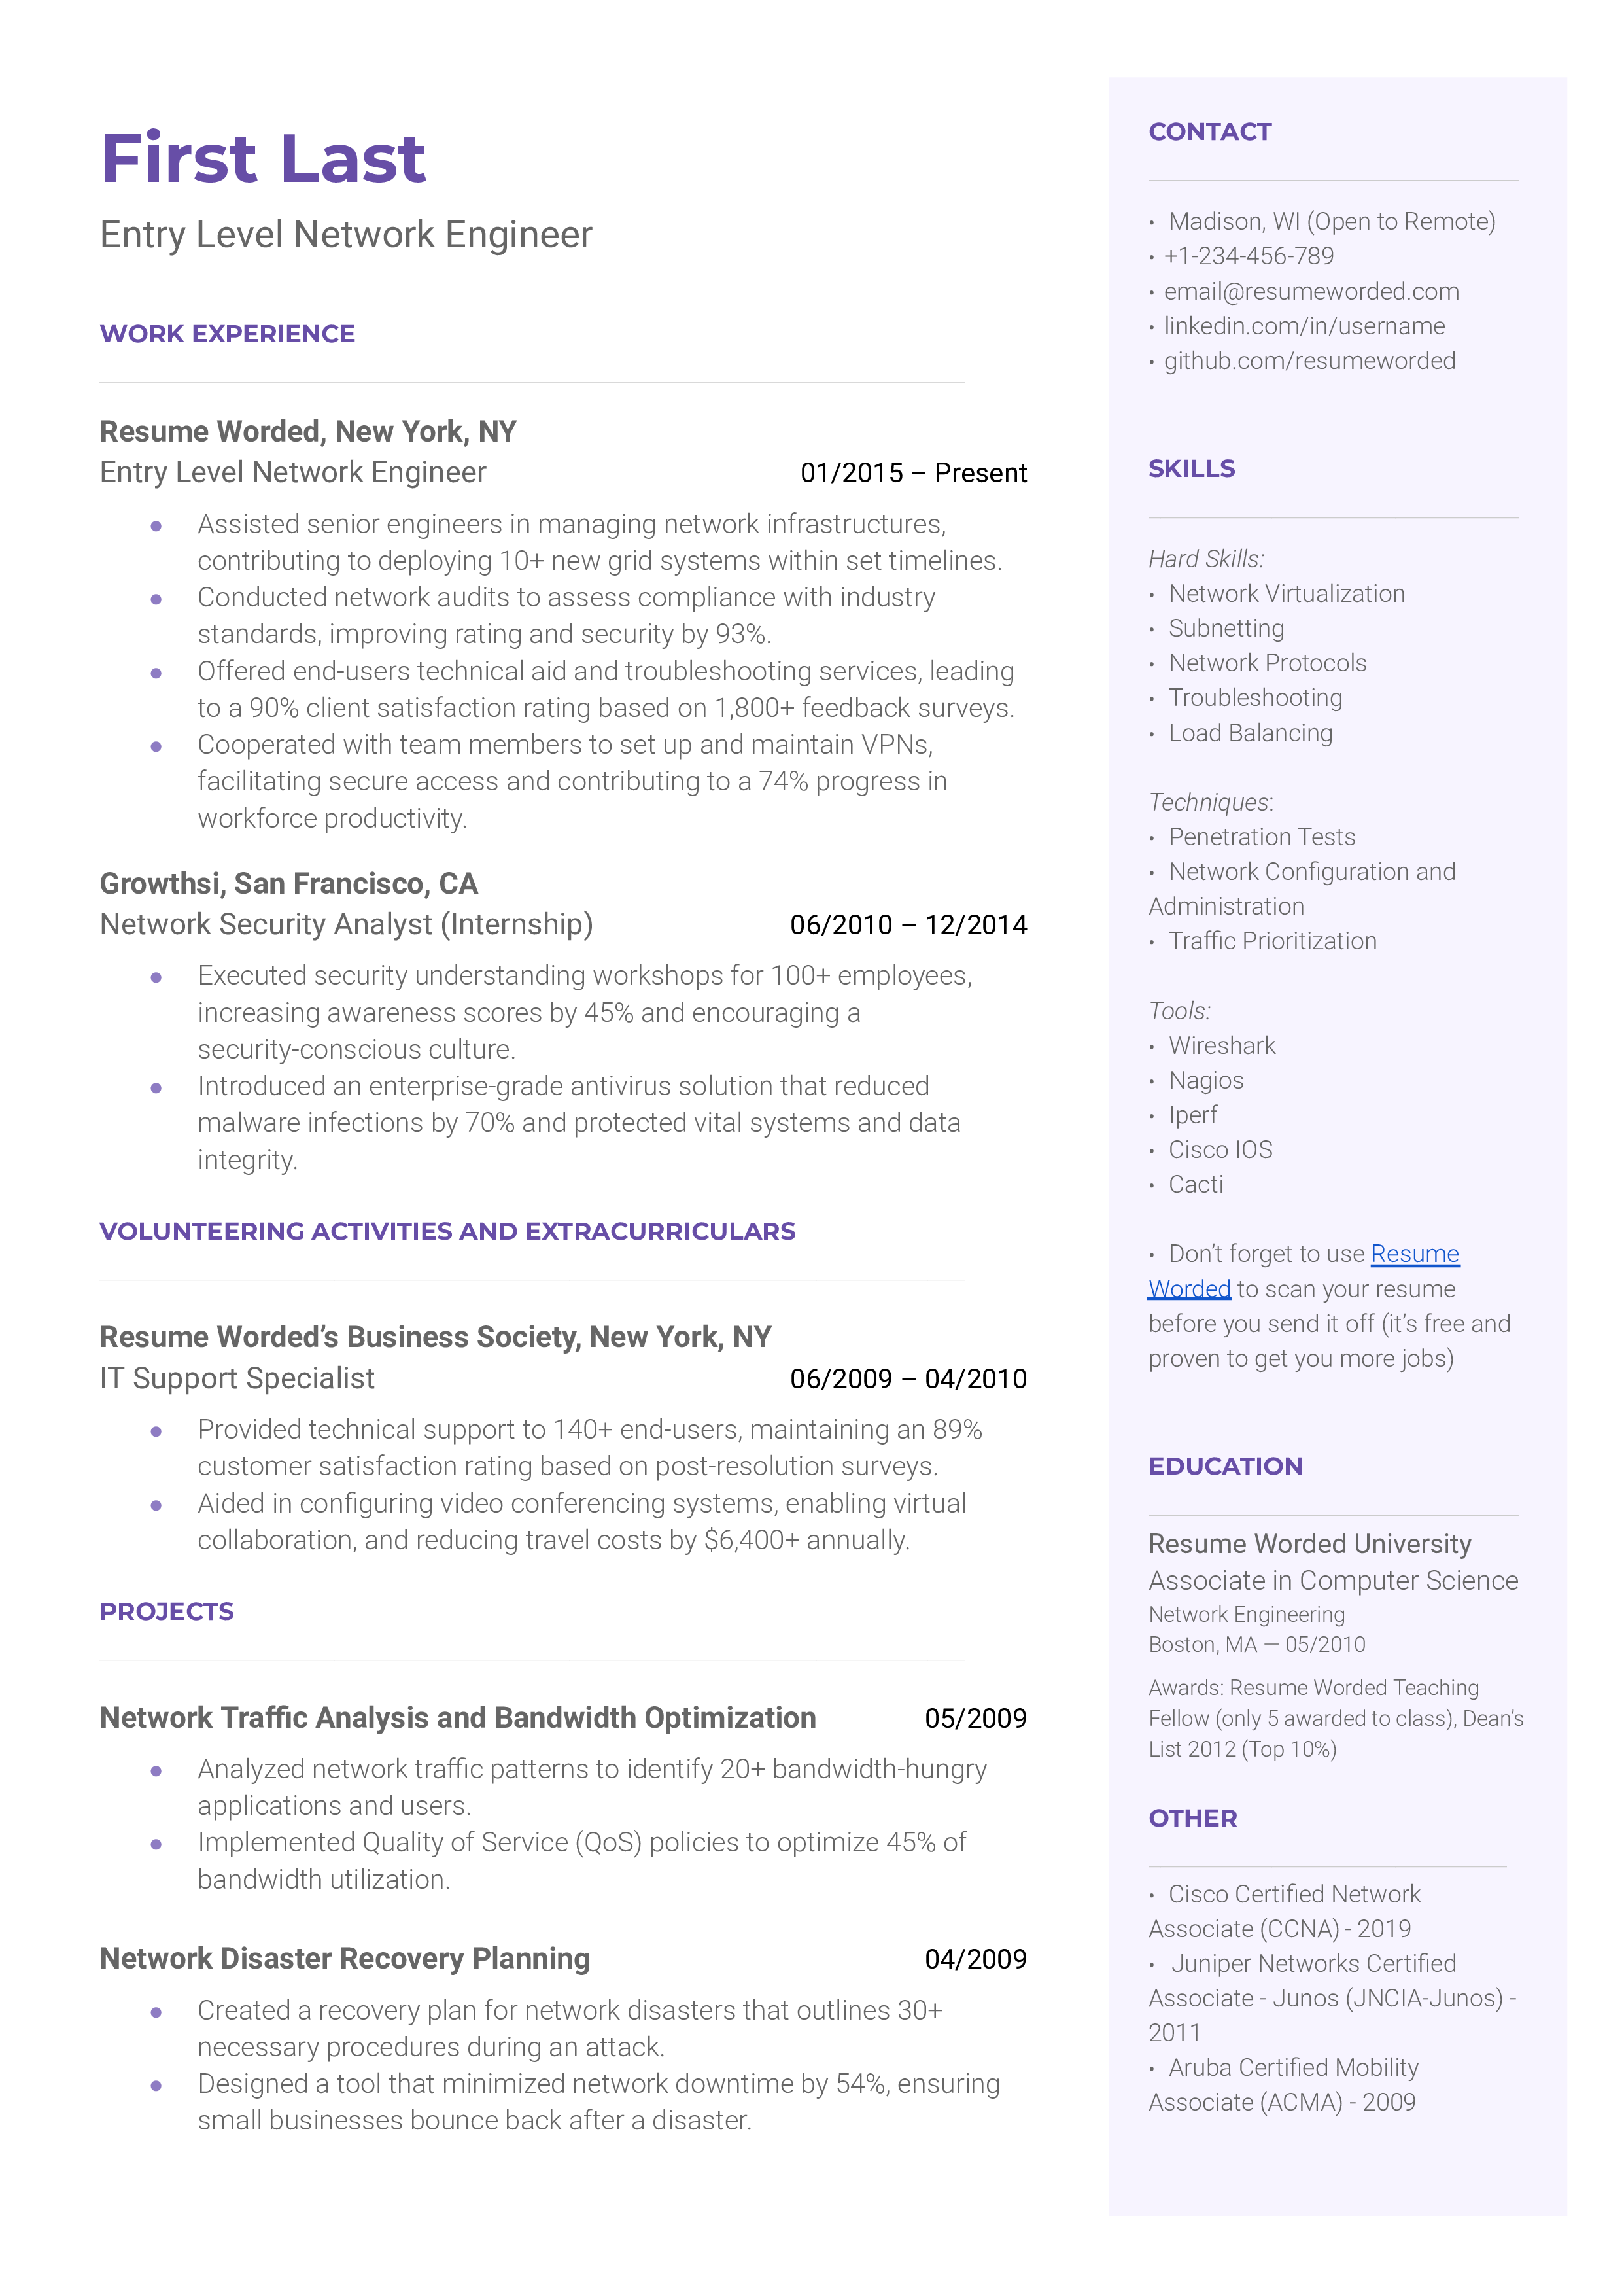 An organized, clear resume for an entry-level network engineer highlighting relevant certifications and hands-on experience.